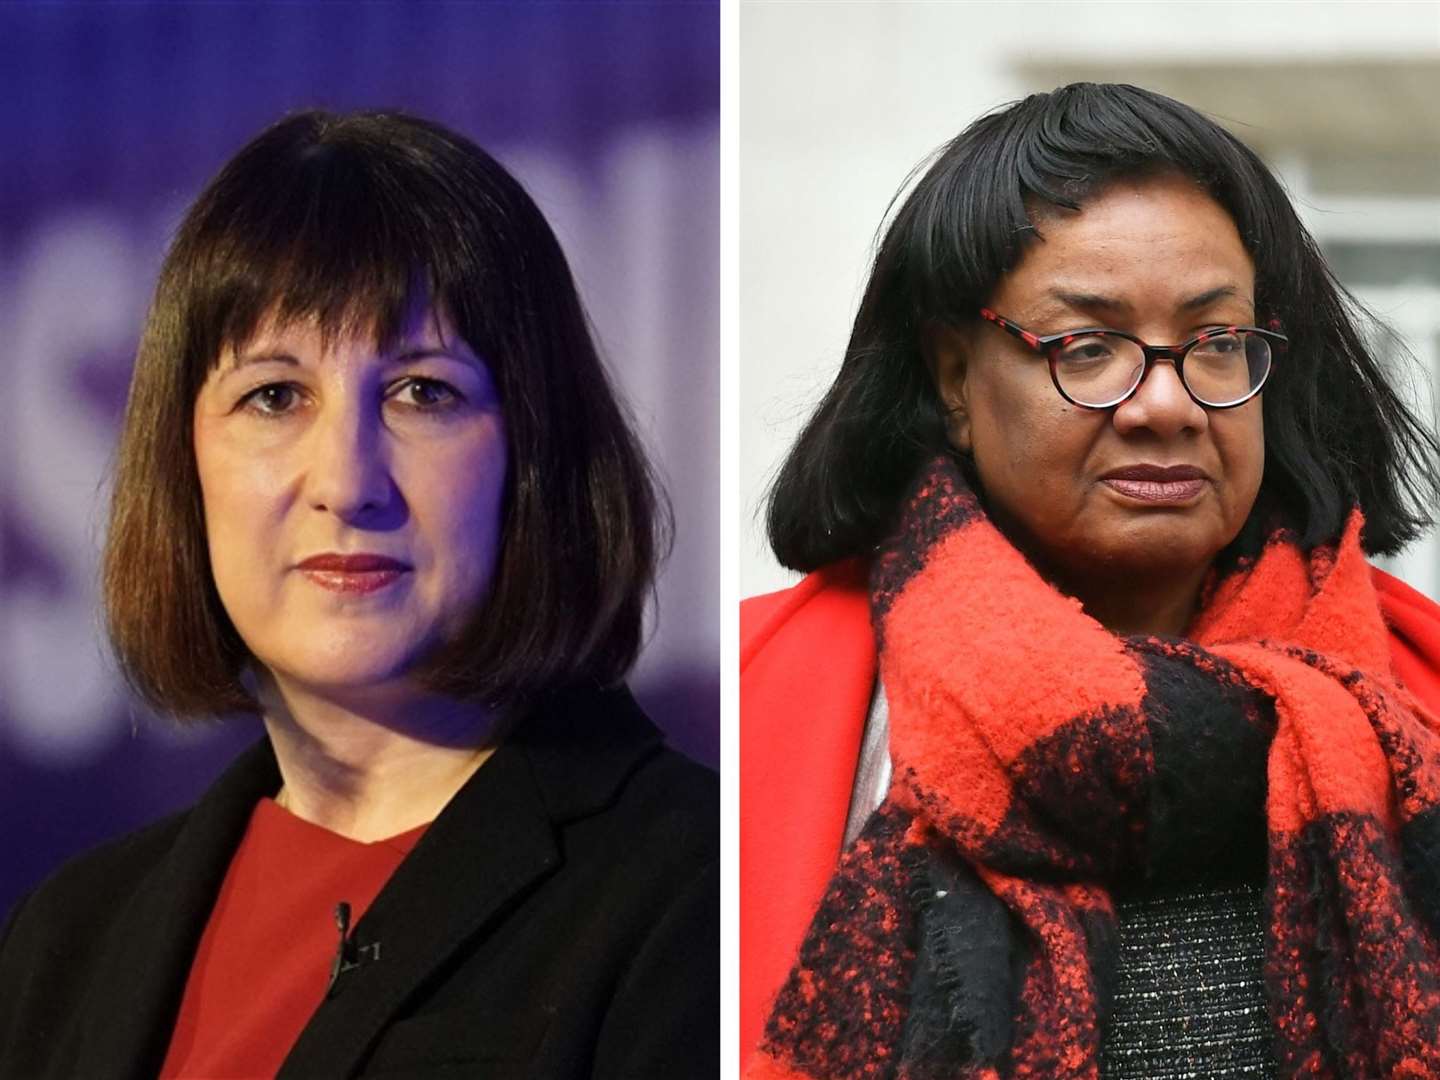 From left: Rachel Reeves speaks on Diane Abbott racism remarks. Picture: PA and Dominic Lipinski/PA